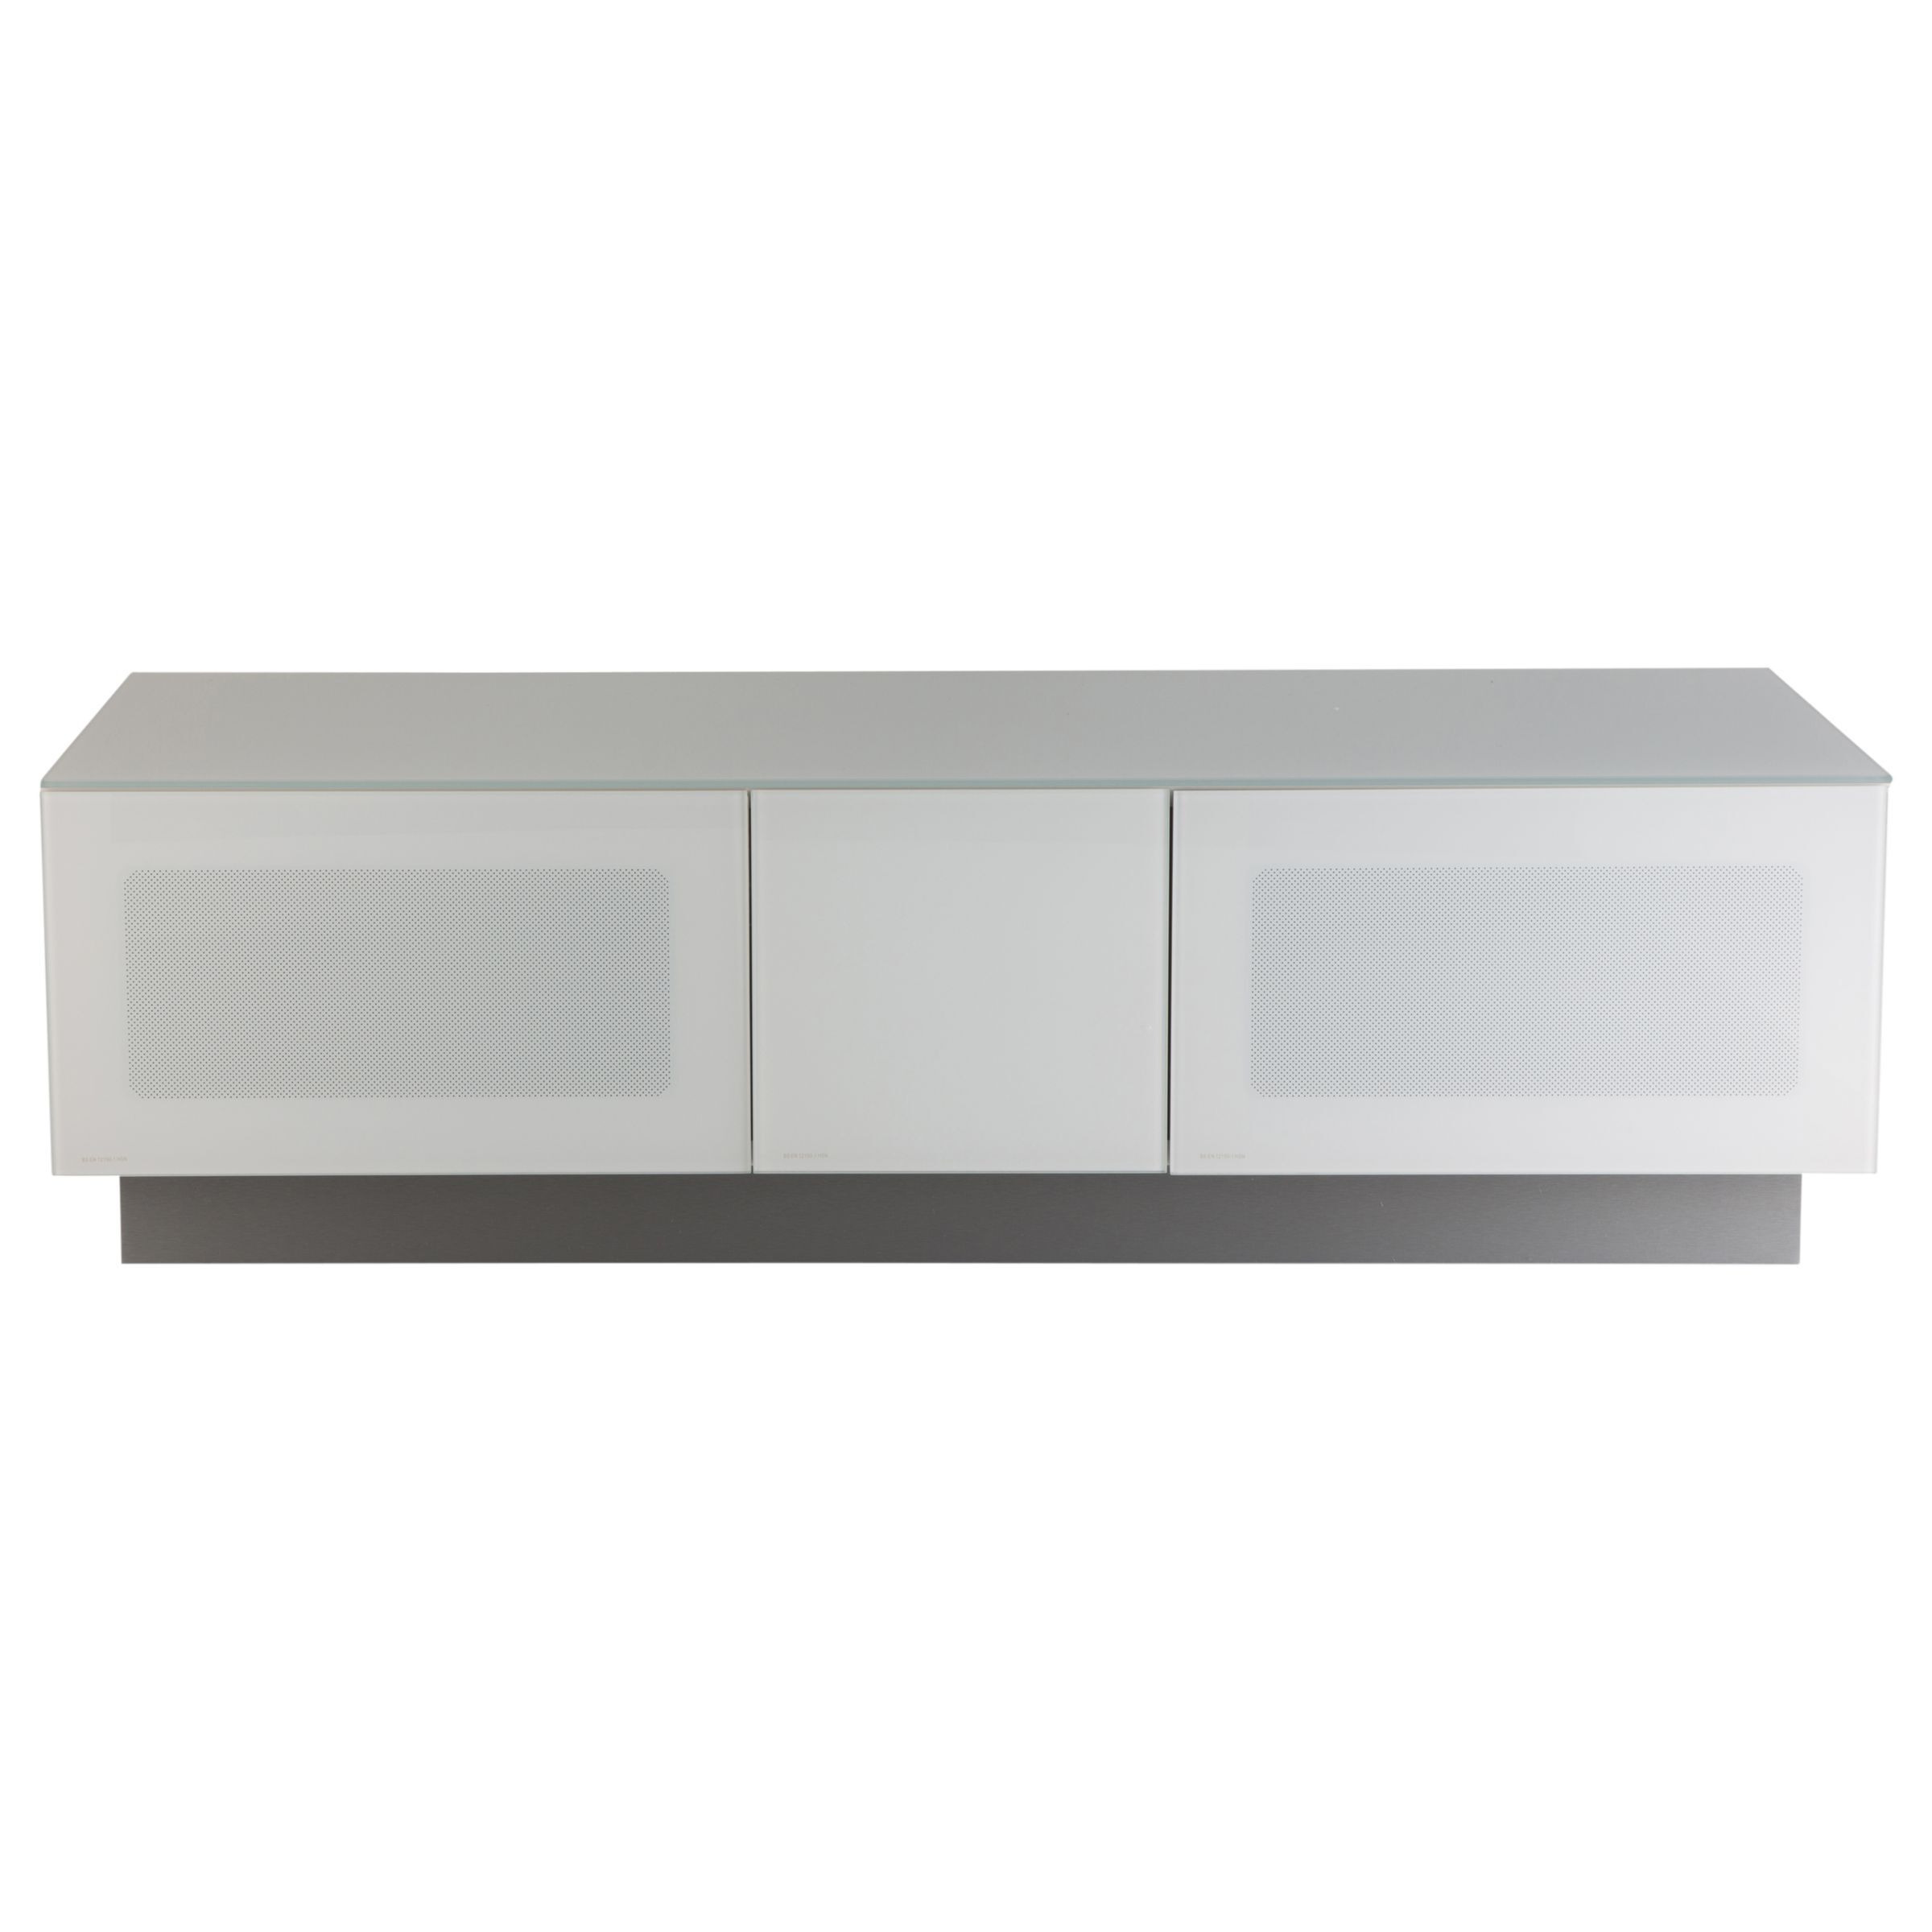 "Alphason Element Modular 1250mm TV Stand For TVs Up To 60""" - image 1